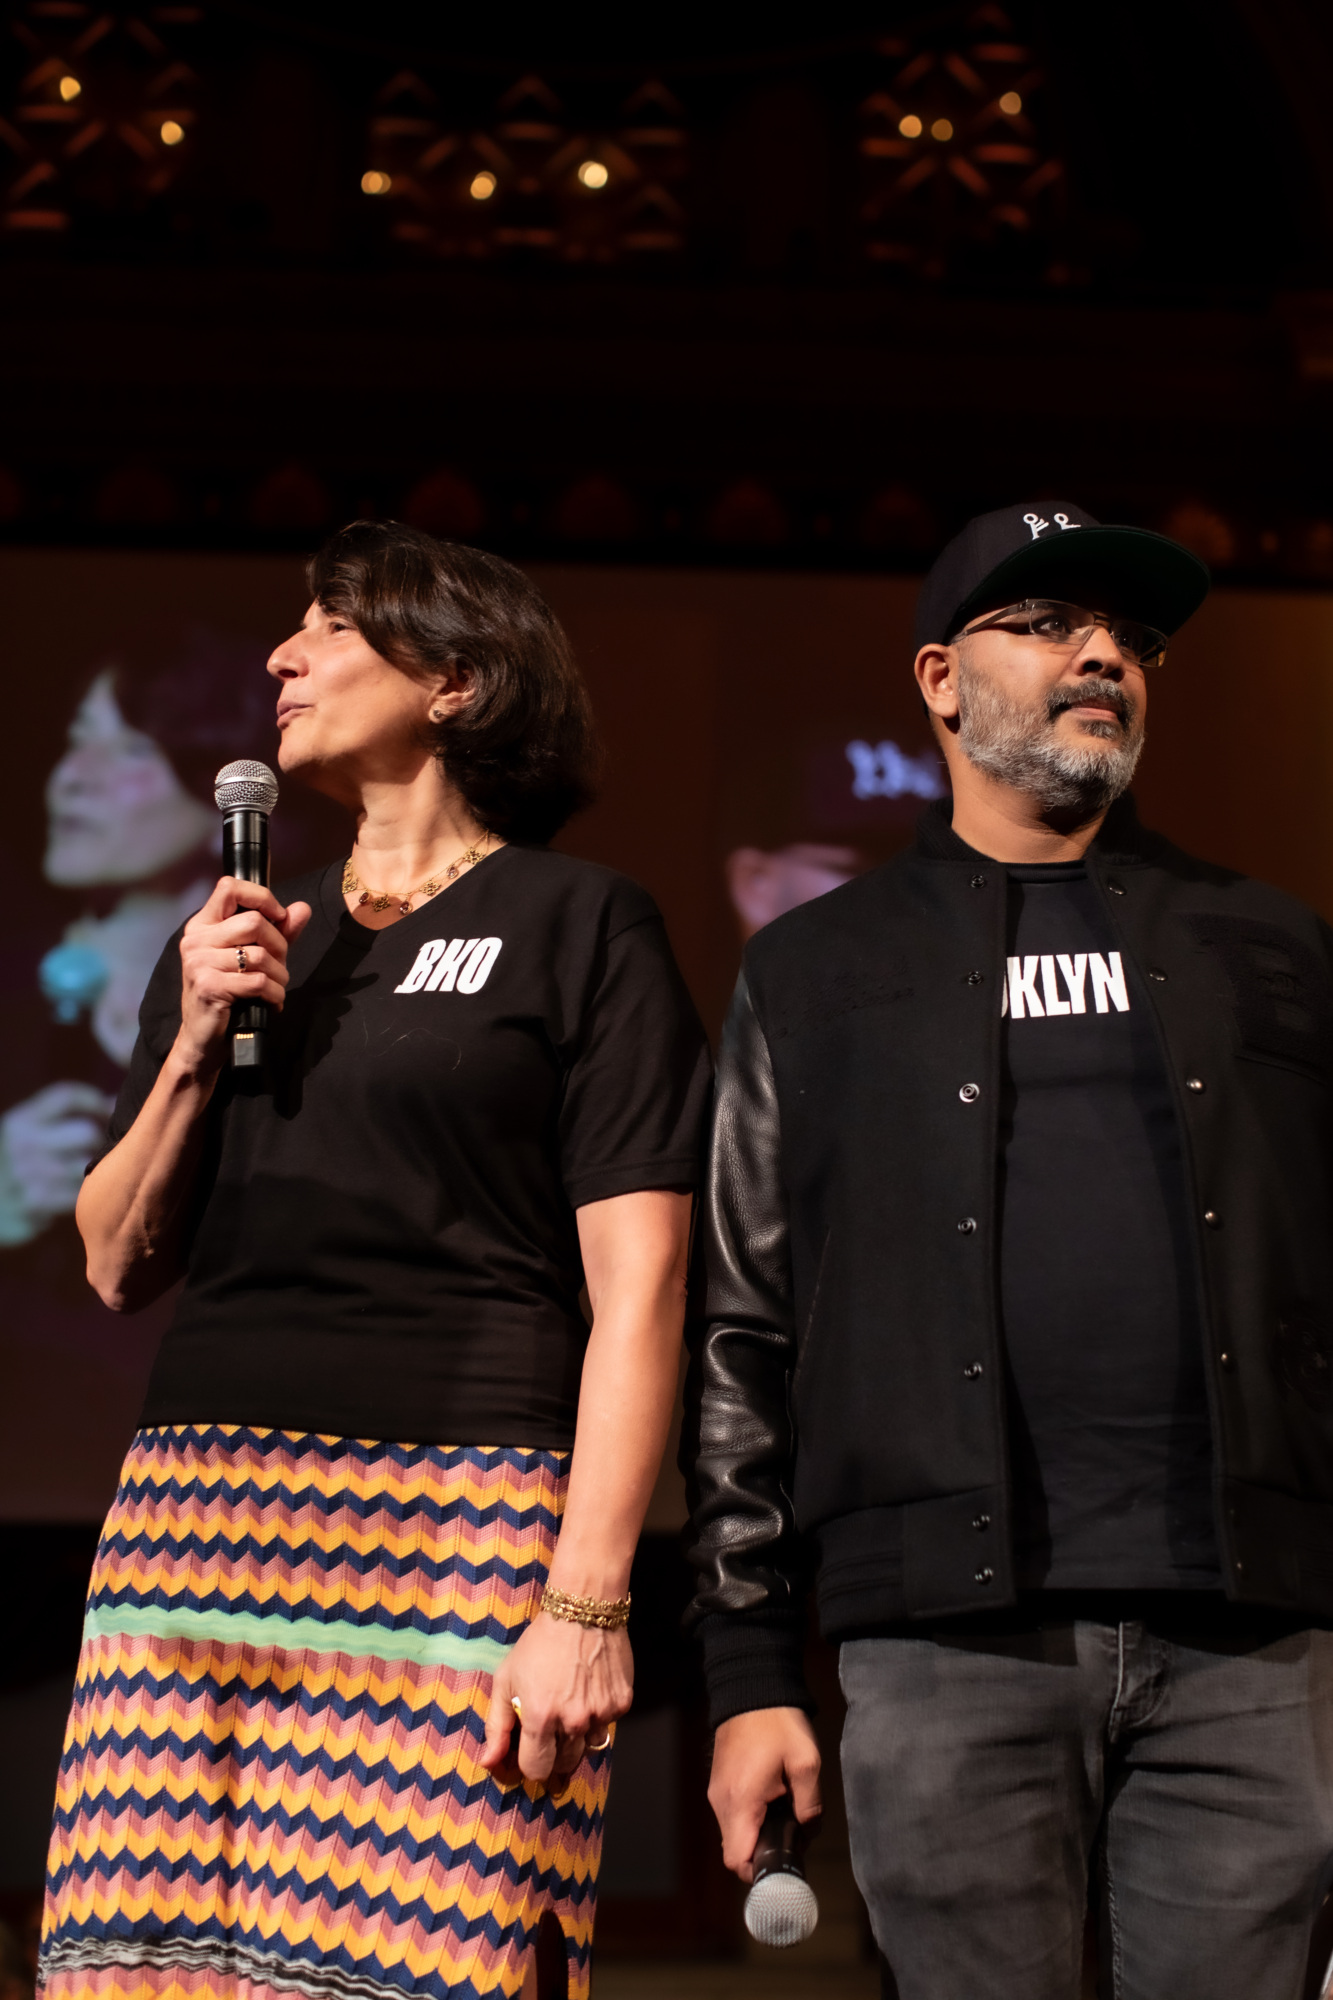 A man and a woman standing on stage.